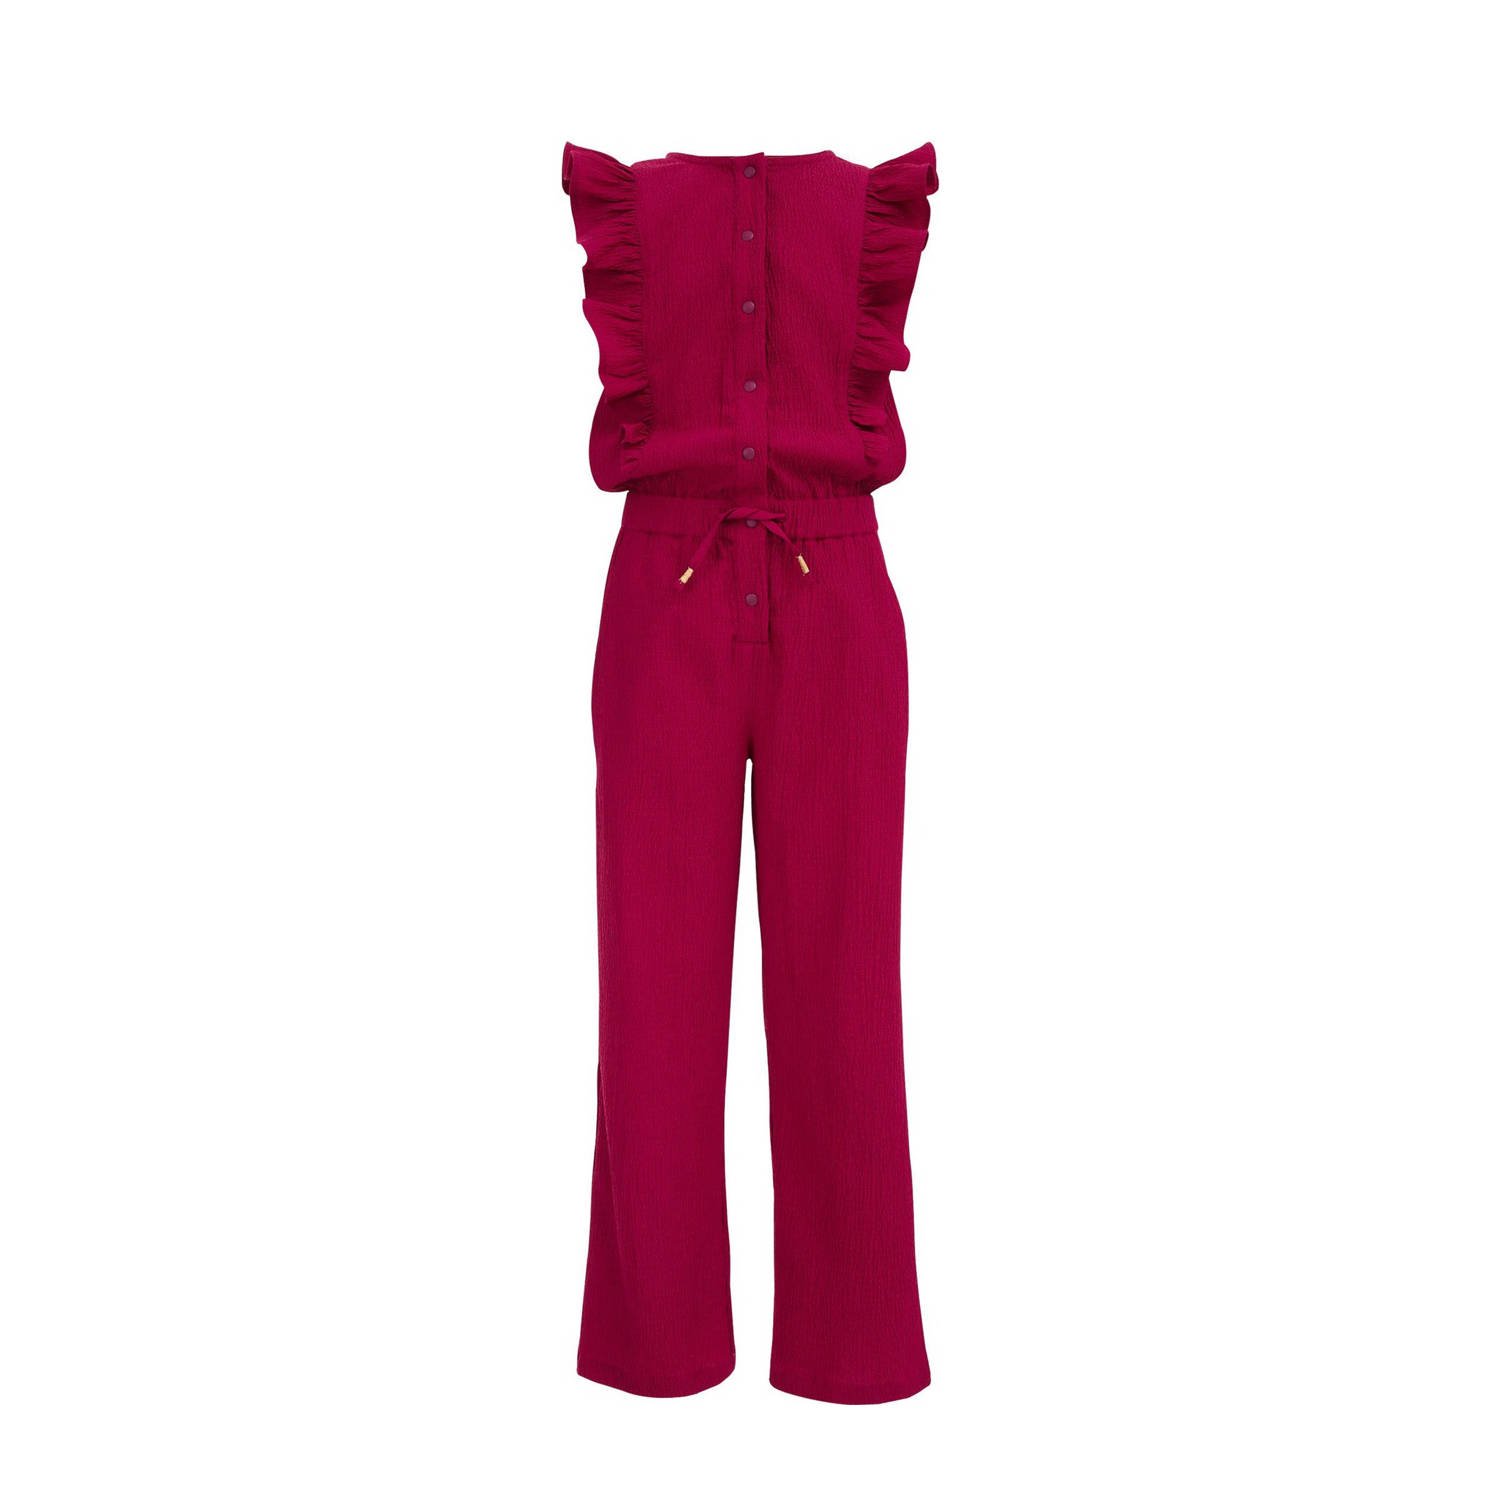 WE Fashion jumpsuit bordeaux rood Paars Meisjes Gerecycled polyester Ronde hals 116